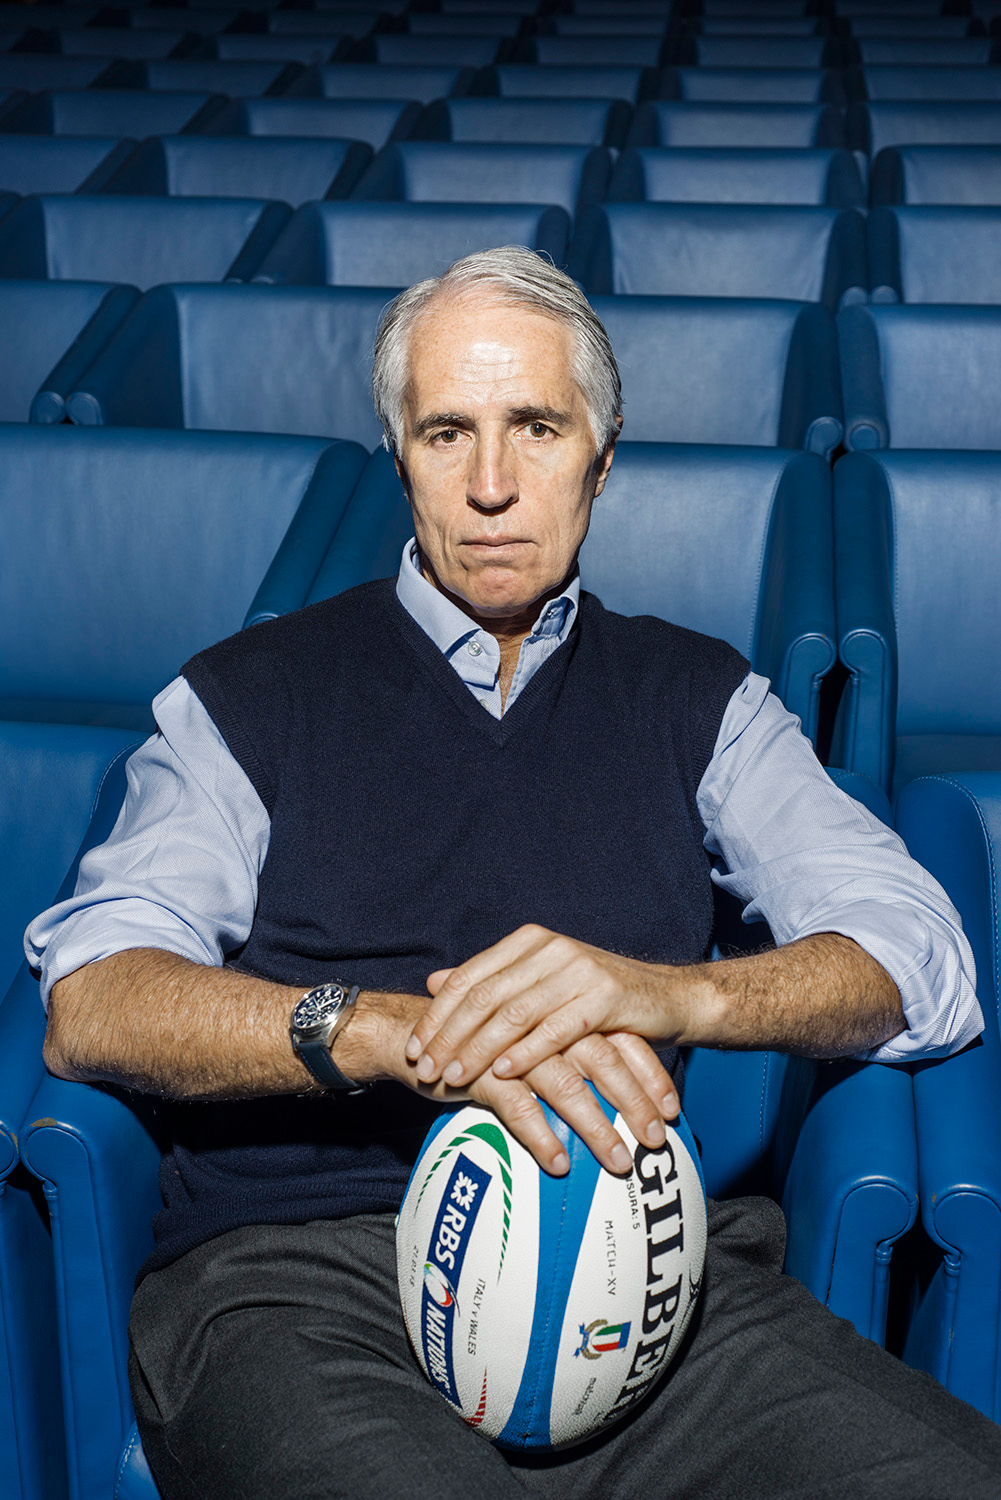 Giovanni Malagò (b.1959) President of the Italian National Olympic Committee (CONI). 12 March 2015, Rome, Italy. For GQ Italia